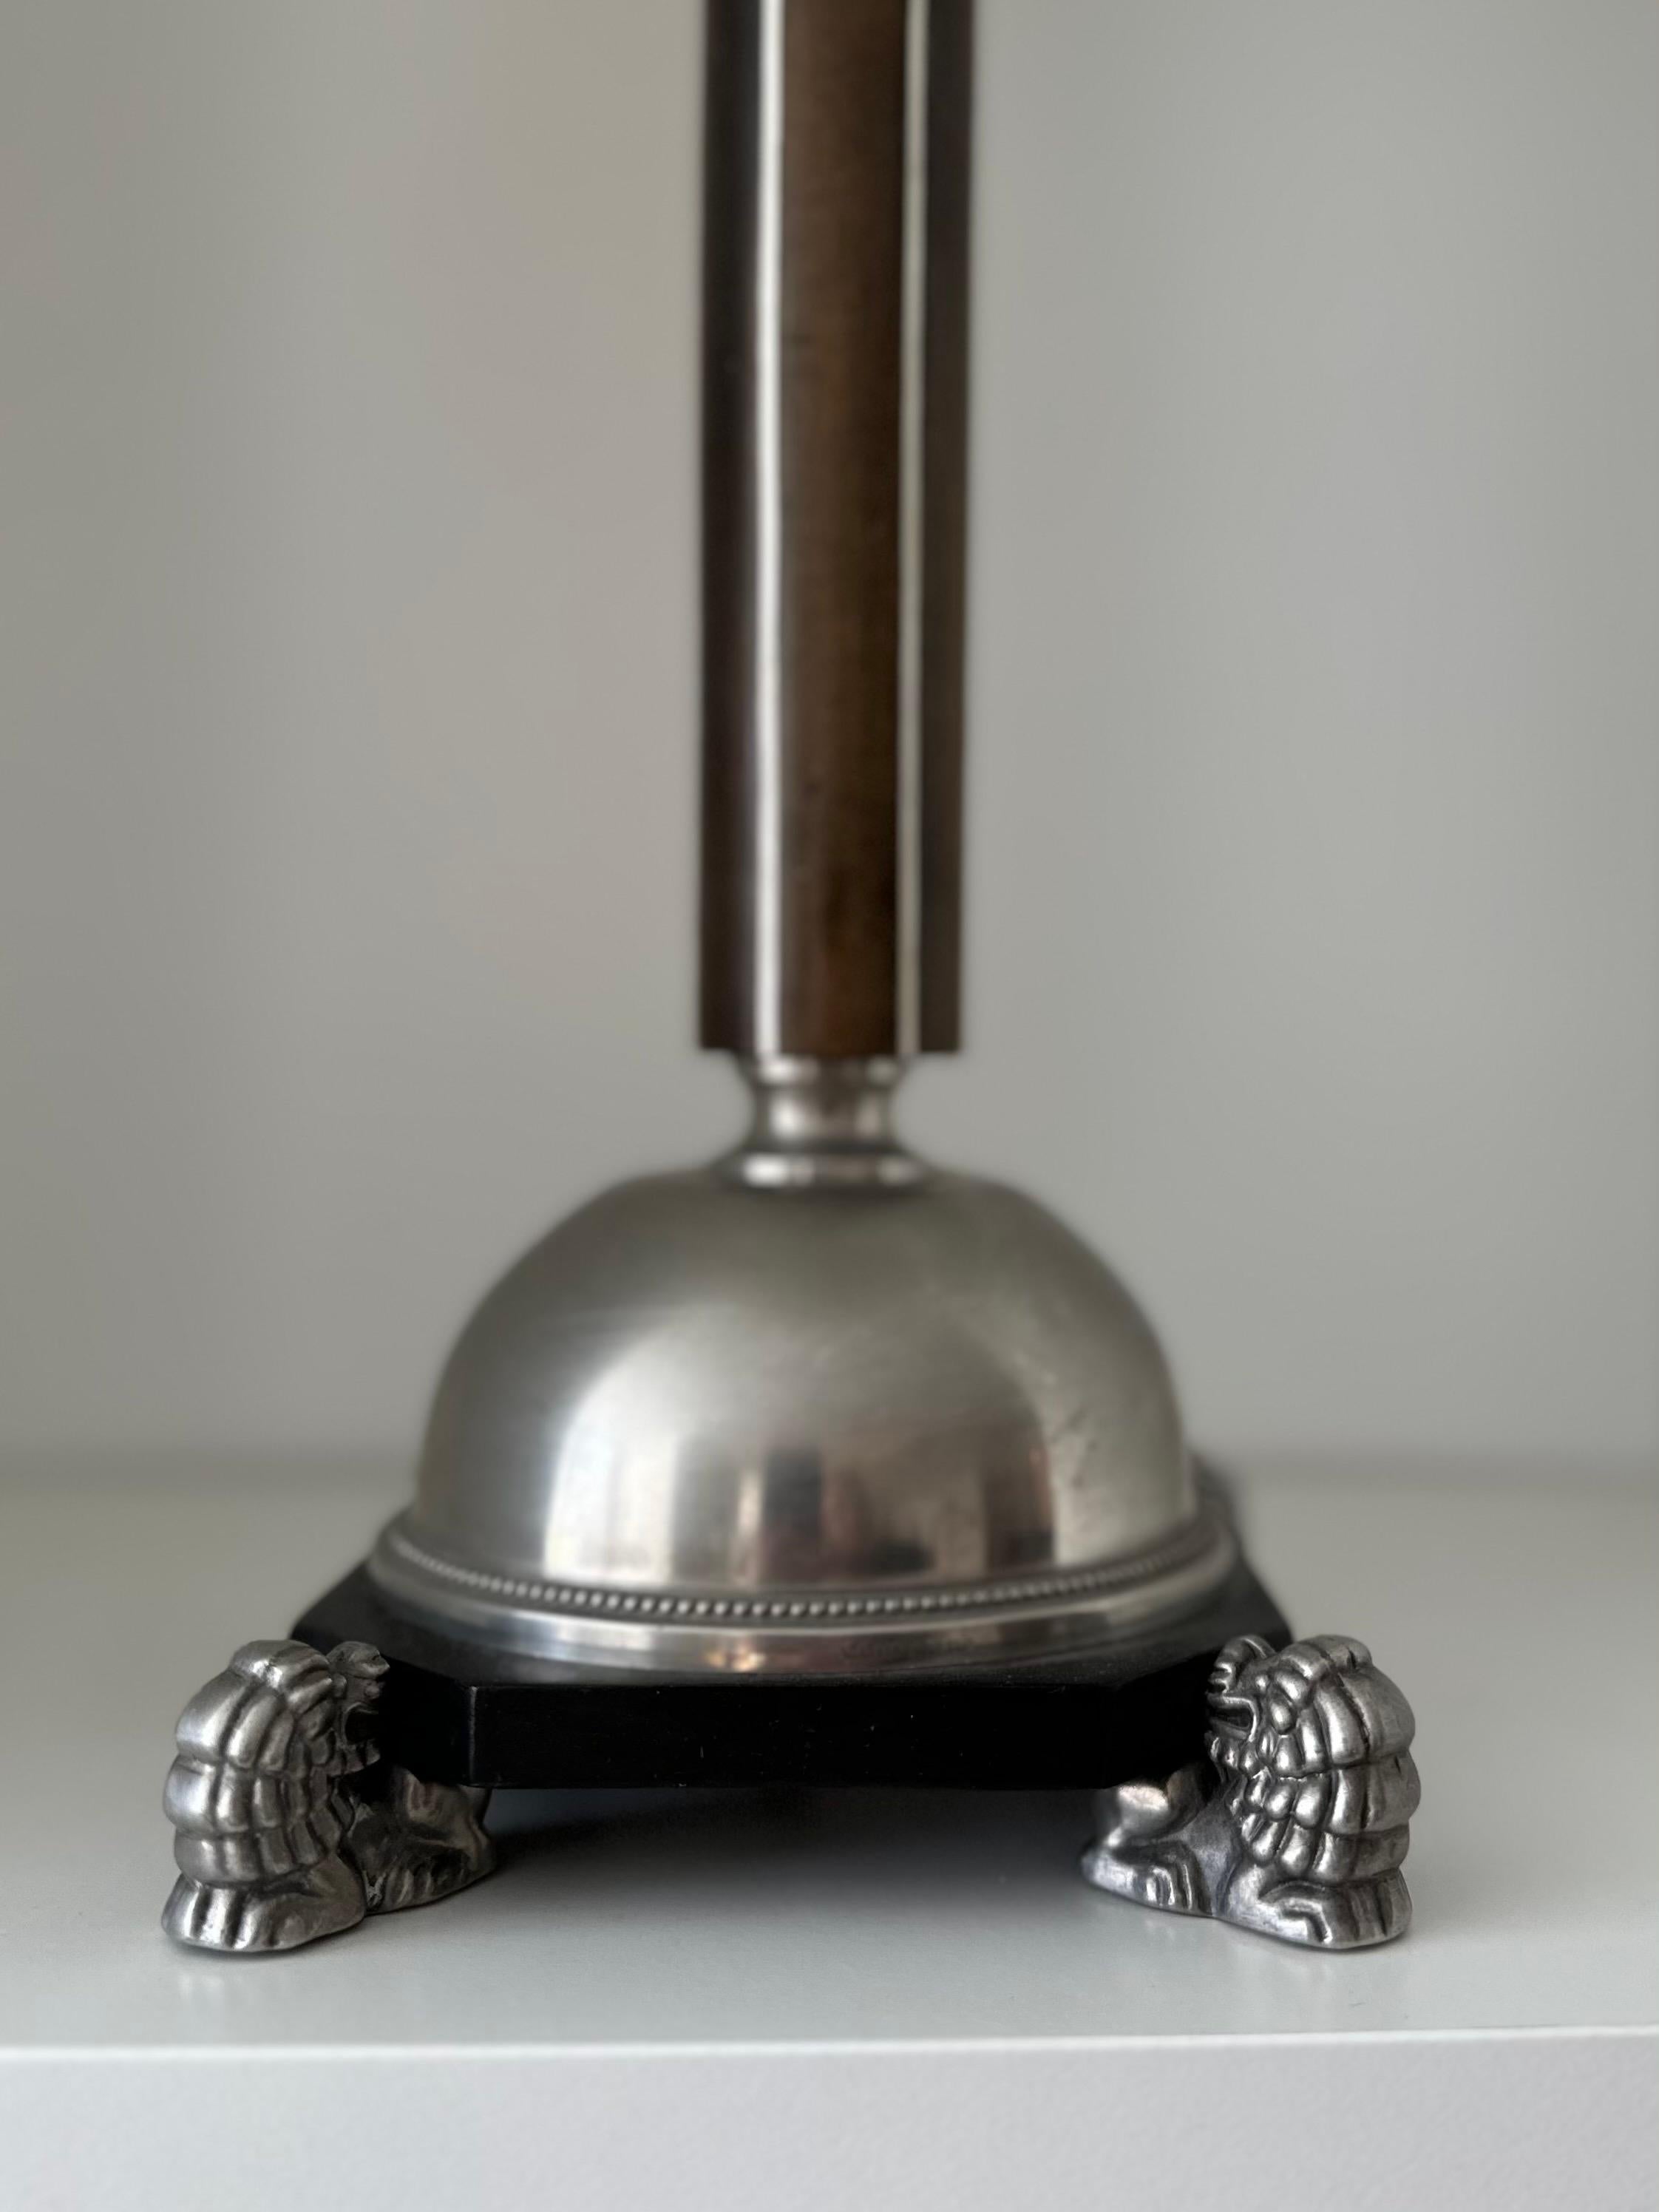 Mid-20th Century Swedish Grace Pewter Table Lamp Likely by Anna Petrus, C.G. Hallberg, 1930s